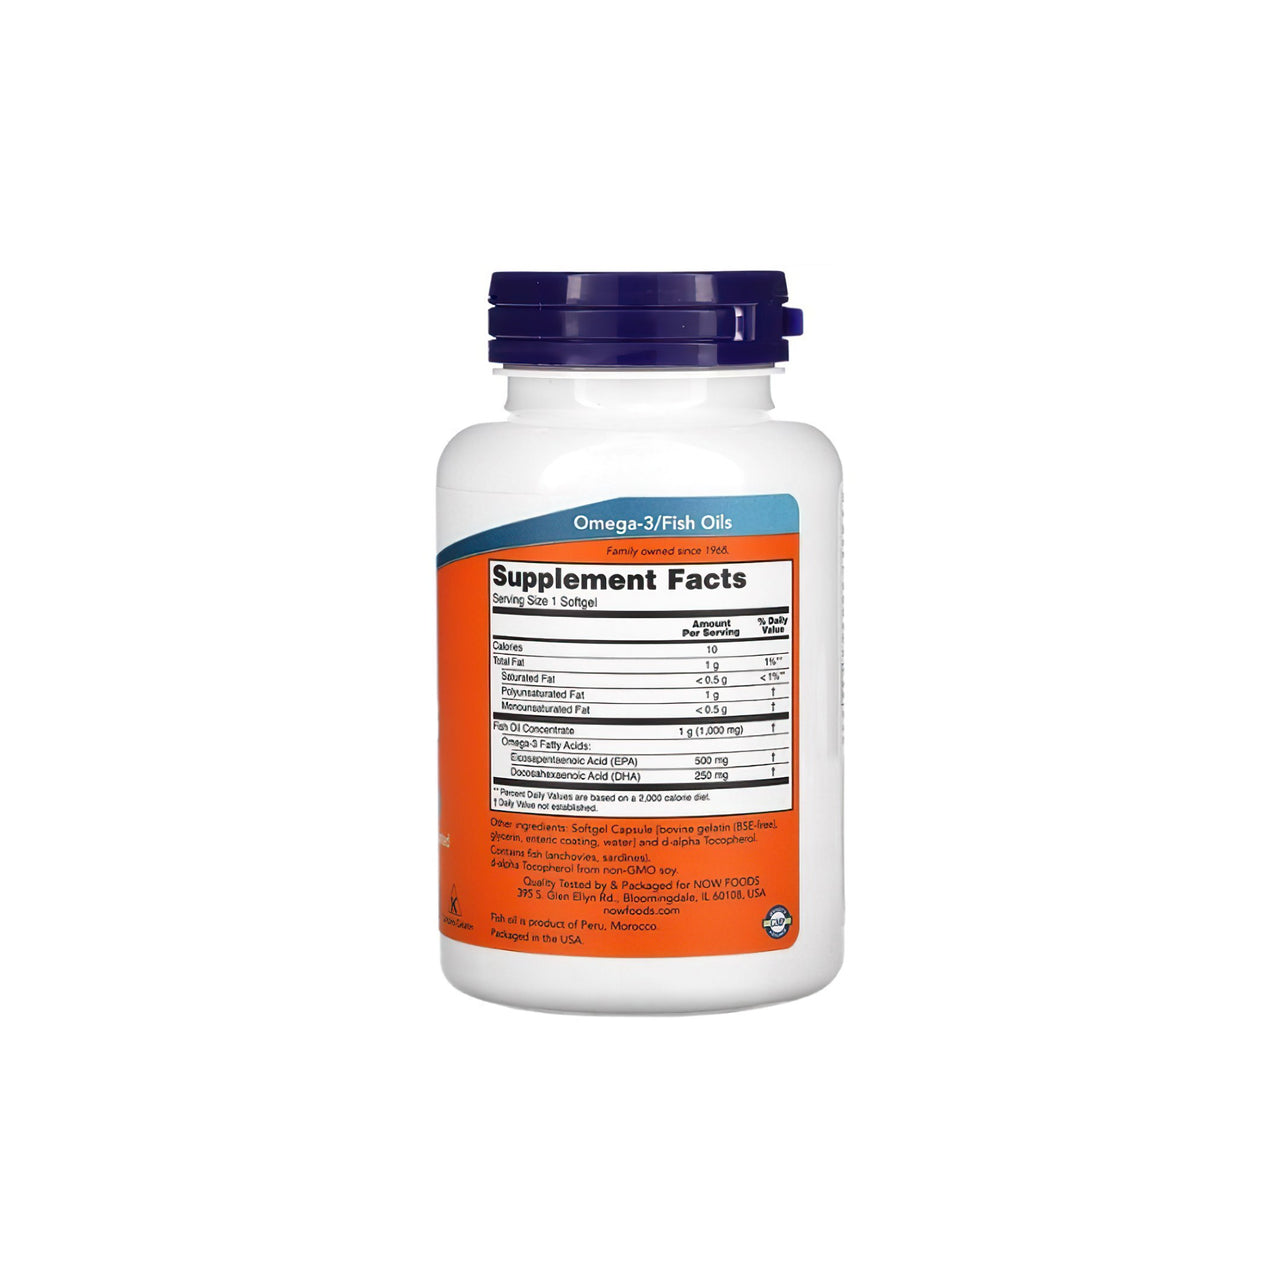 A bottle of Ultra Omega-3 500 mg EPA/250 mg DHA 90 softgel by Now Foods providing cardiovascular support on a white background.